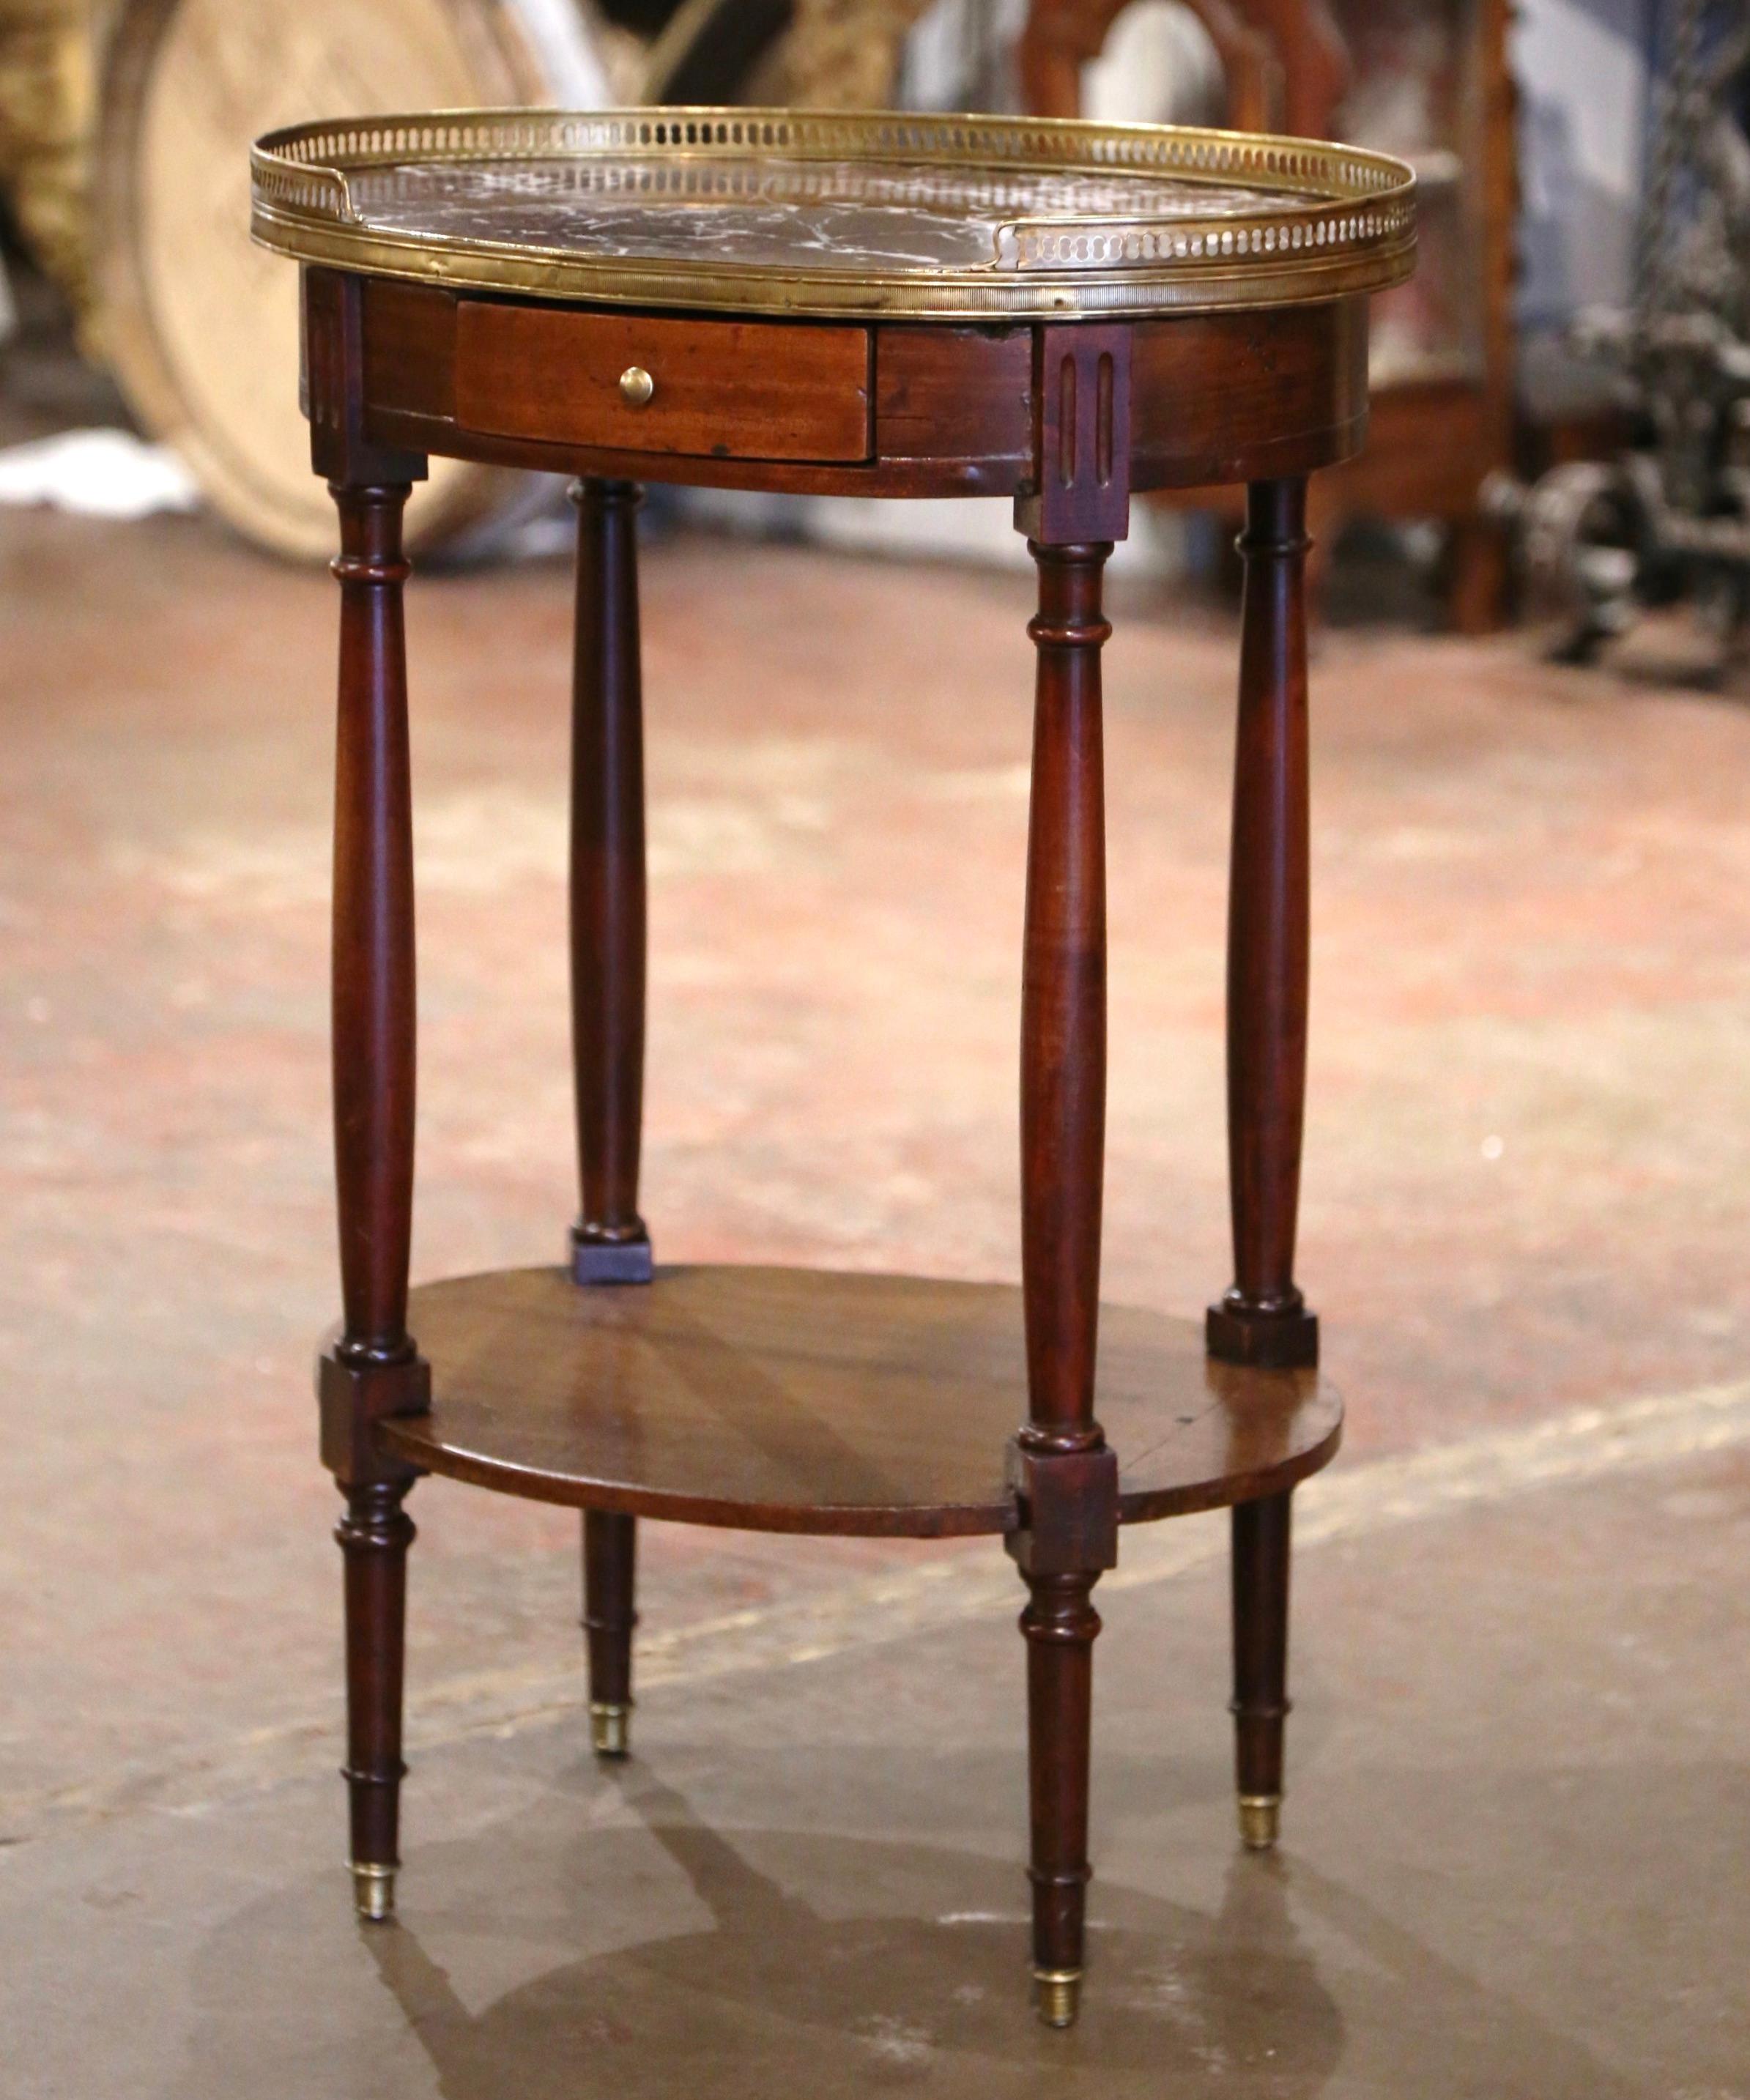 Crafted in France circa 1920 and built of walnut, the oval table sits on four turned legs decorated with brass mounts at the feet over a curved apron dressed with a drawer. The luxurious variegated brown and white marble top is set inside an